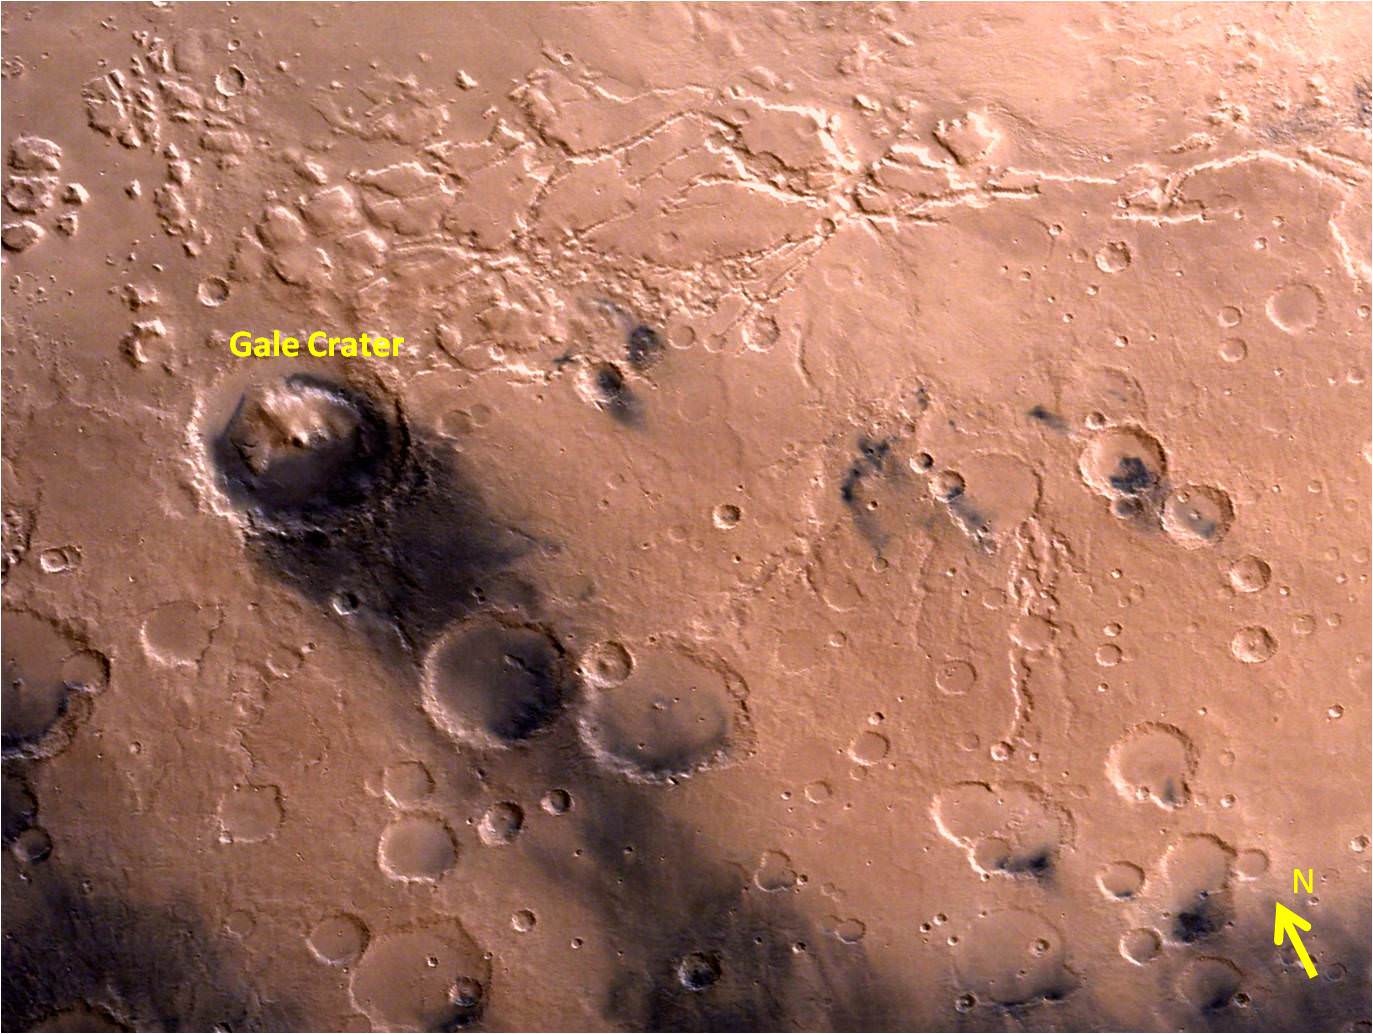 Gale Crater - landing site of NASA’s Curiosity rover - and vicinity as seen by India’s Mars Orbiter Mission from an altitude of 9004 km.  Gale crater is home to humongous Mount Sharp which rises 5.5 km from the crater floor and is easily visible in this photo.   Credit: ISRO